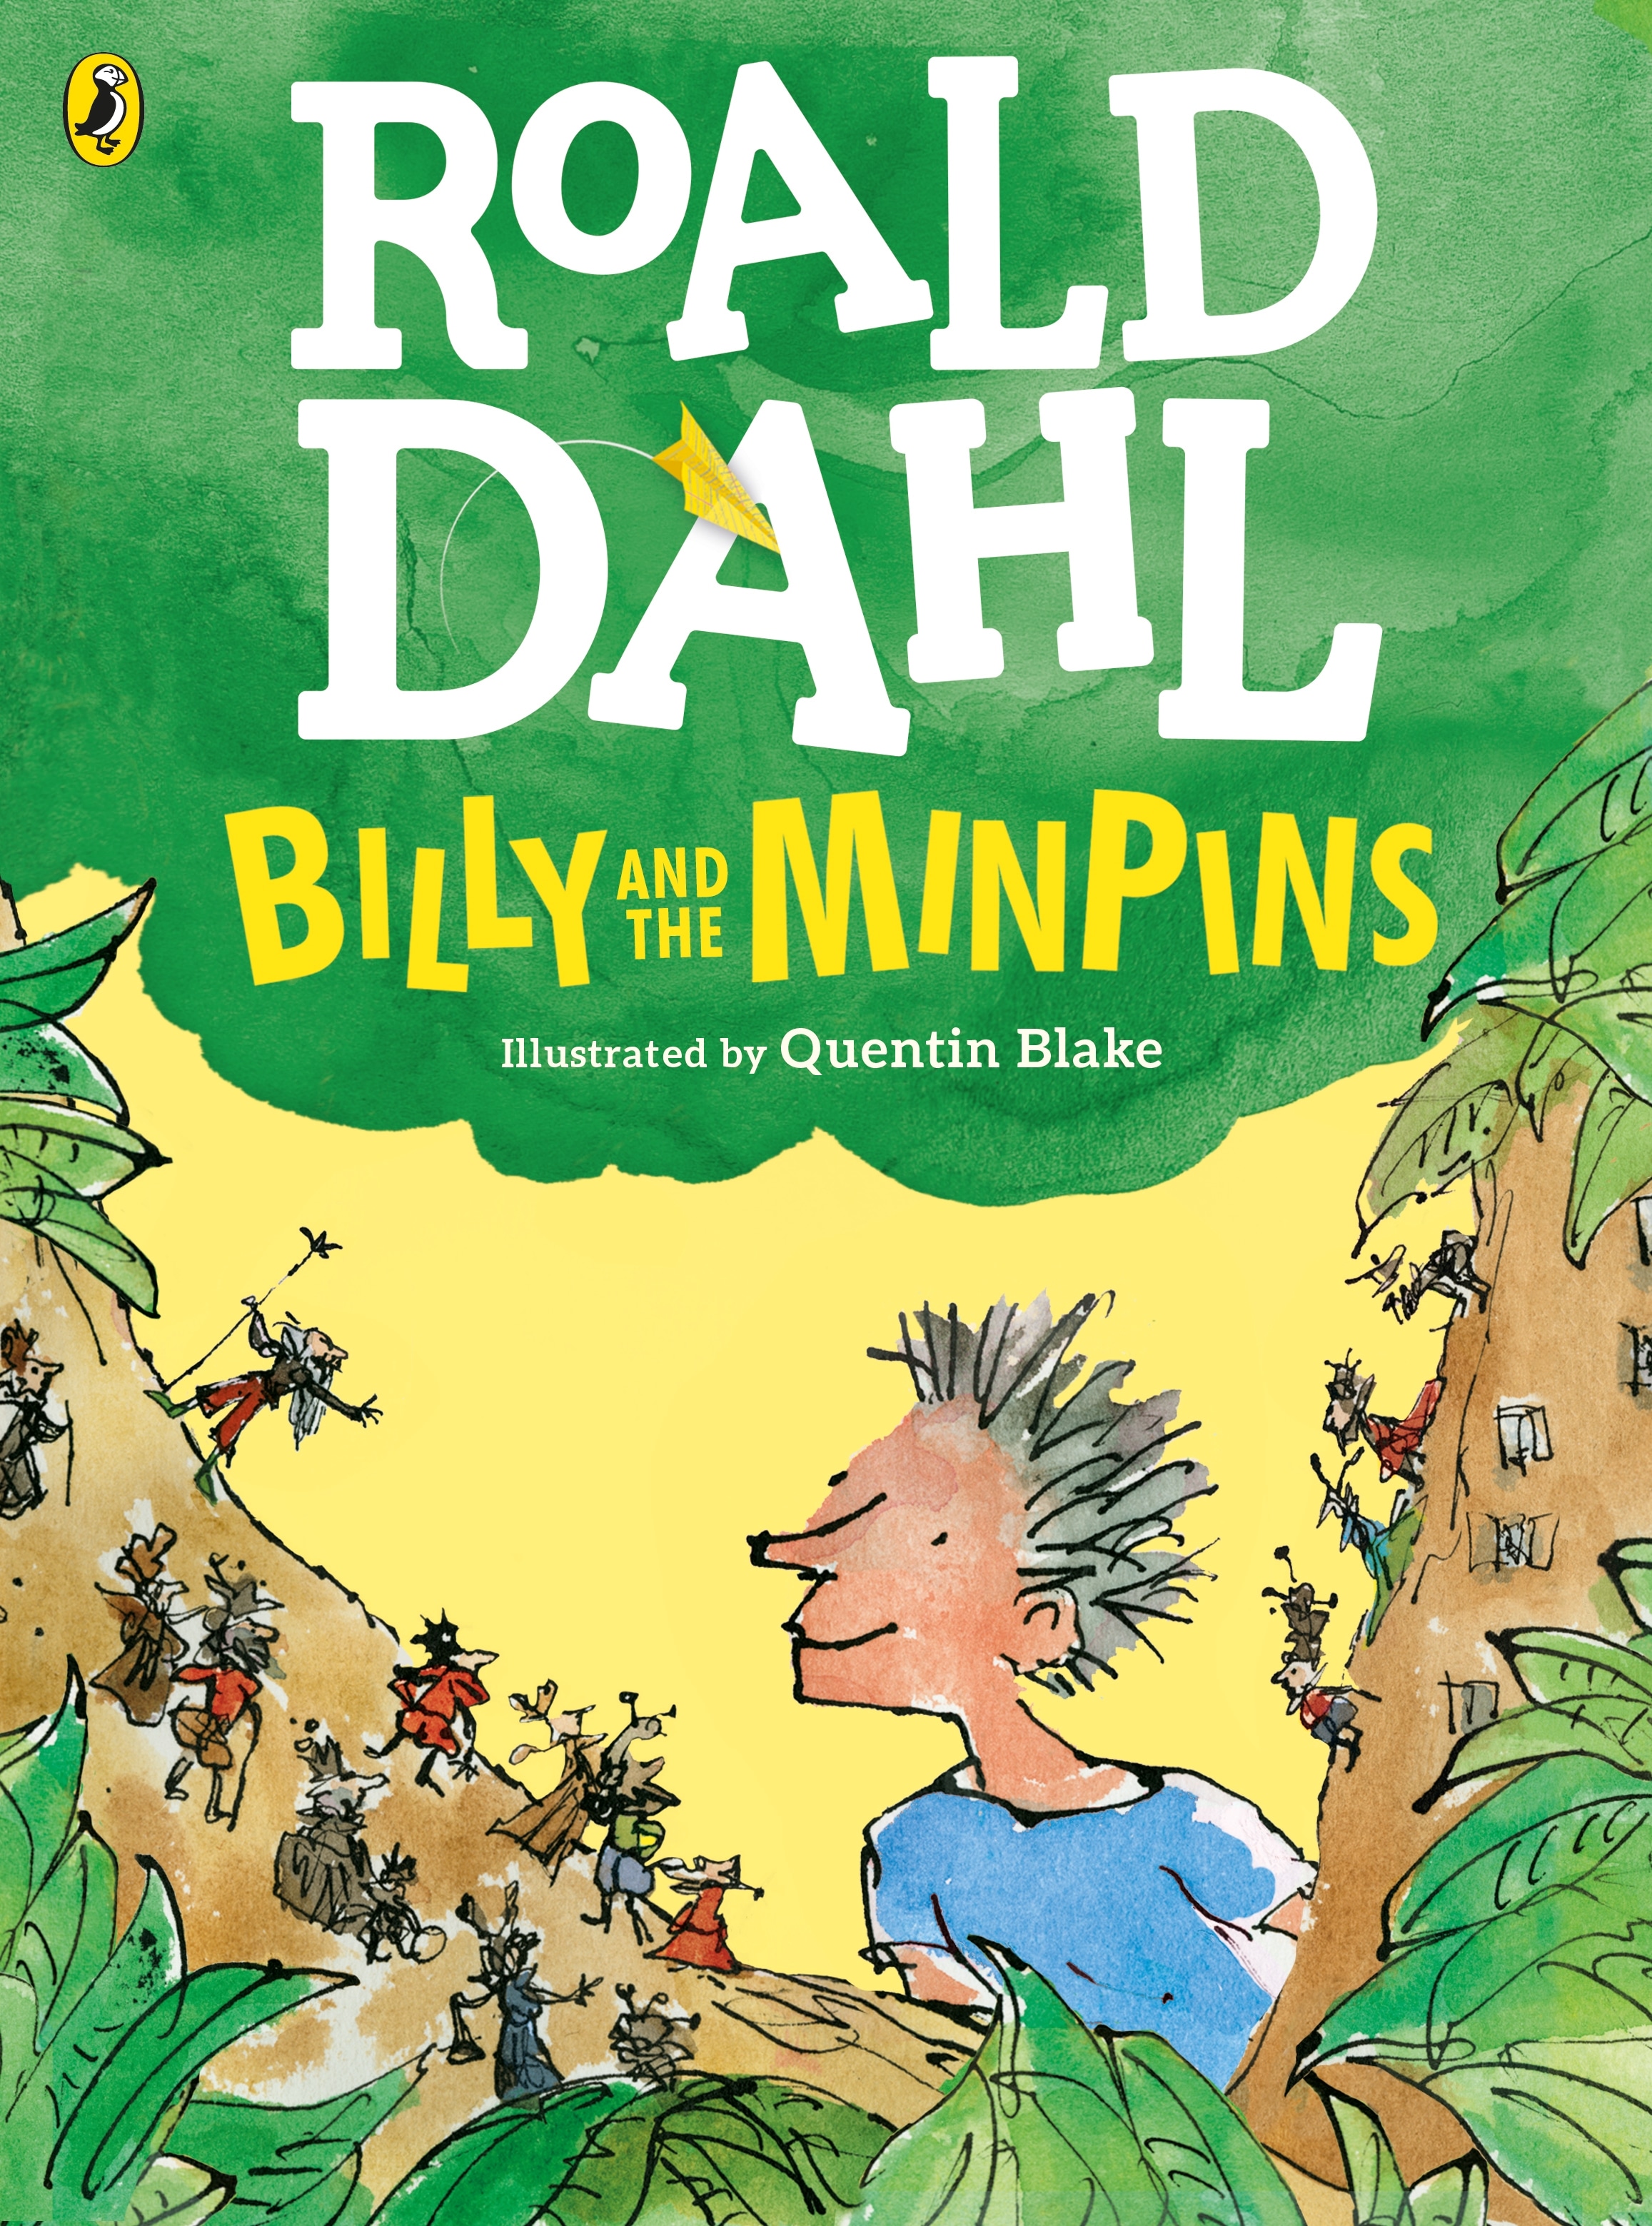 Book “Billy and the Minpins (Colour Edition)” by Roald Dahl — January 10, 2019